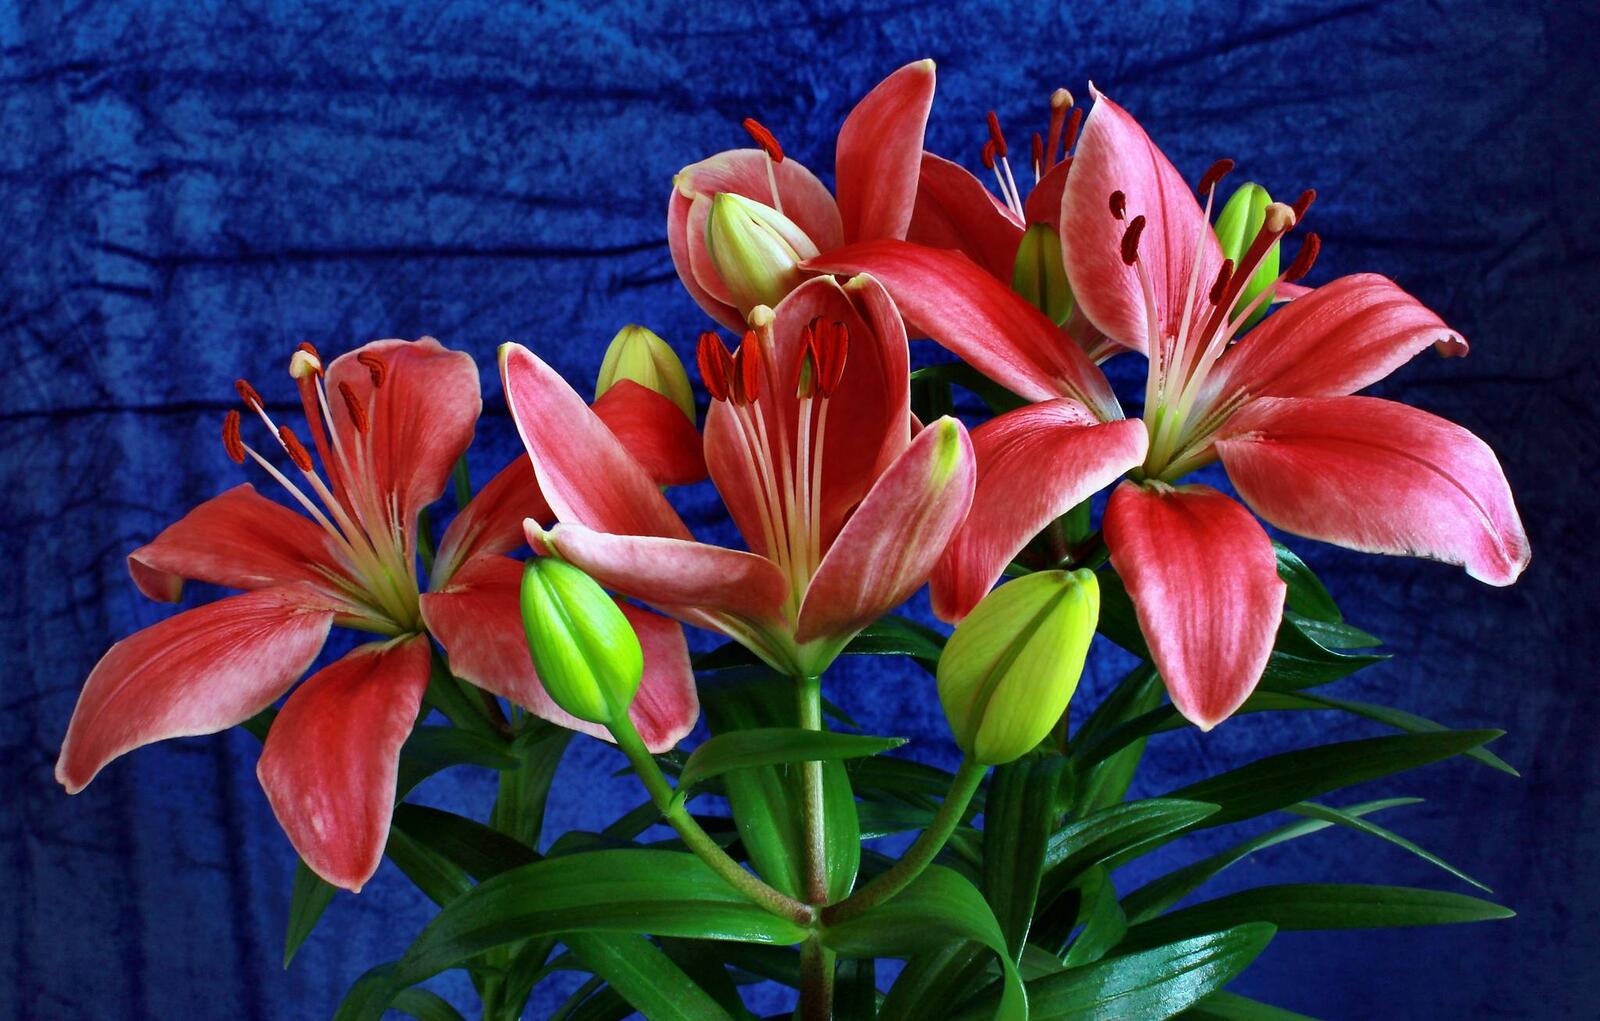 Wallpapers lilies flowers red flowers on the desktop